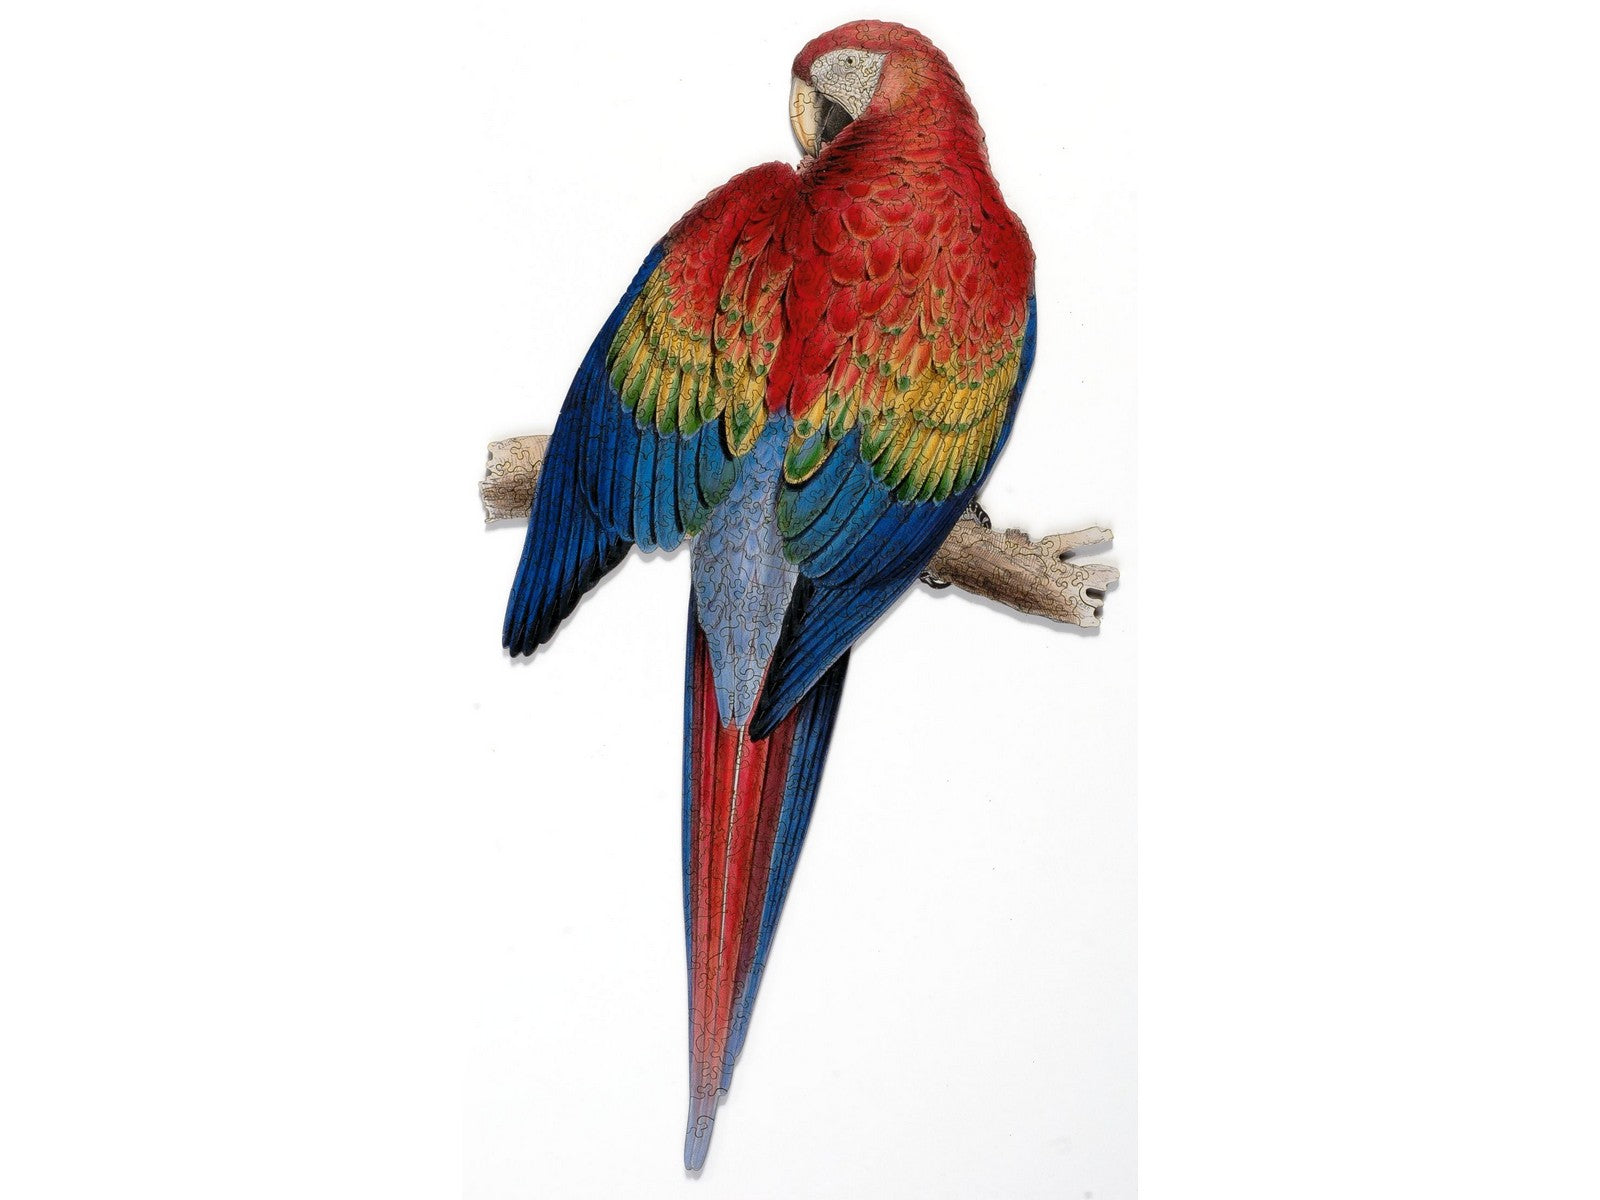 The front of the puzzle, Red and Yellow Macaw, showing an illustration of a multi colored macaw, sitting on a branch.